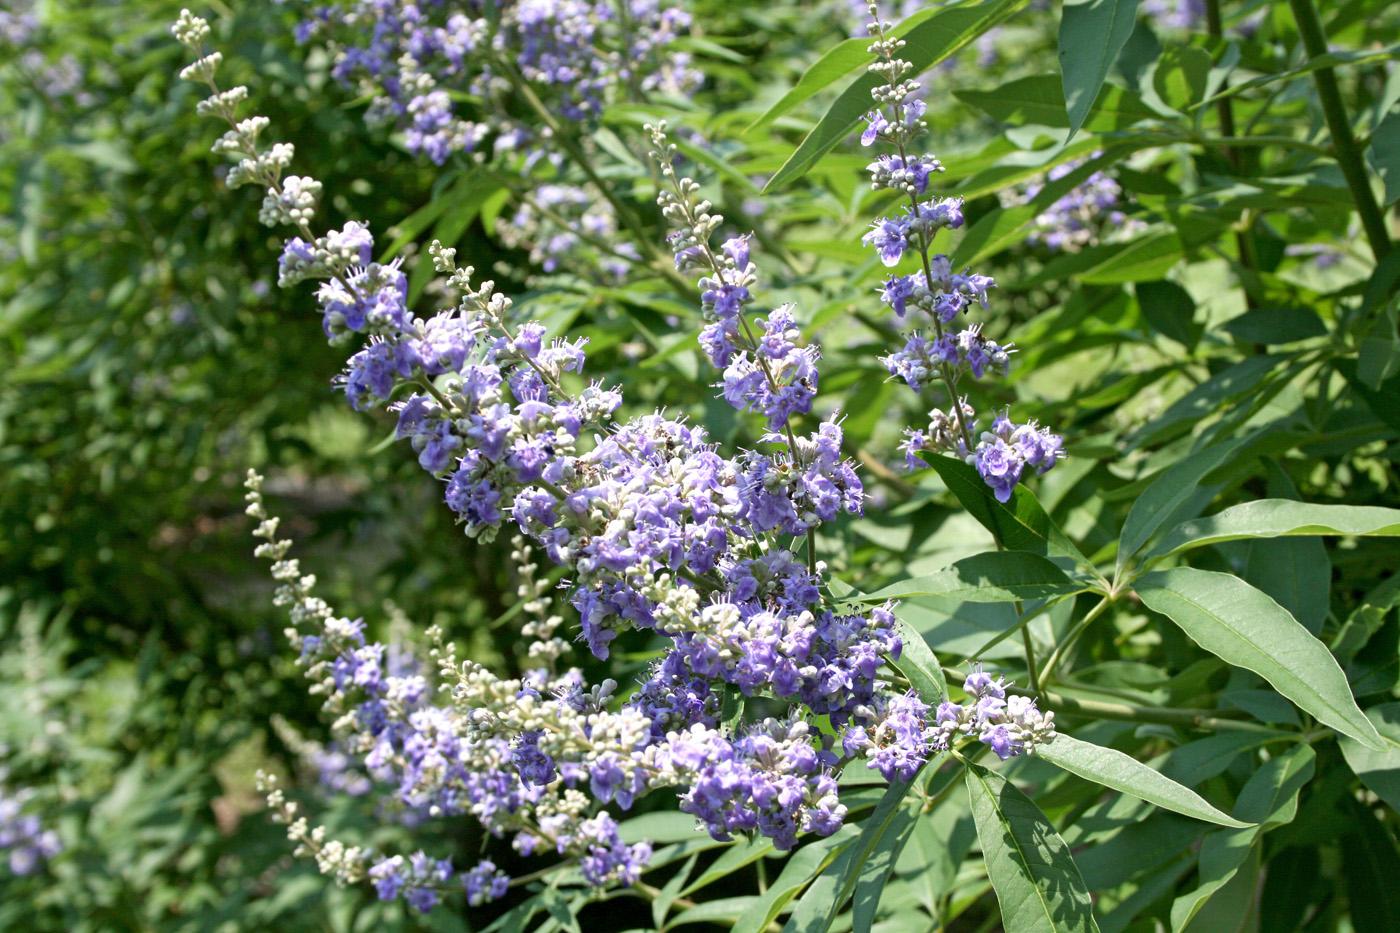 The Chastetree's flower color varies from lavender to lilac to pale violet and the tiny flowers bloom in small clusters that come together to form larger arrangements. (Photo by Gary Bachman)